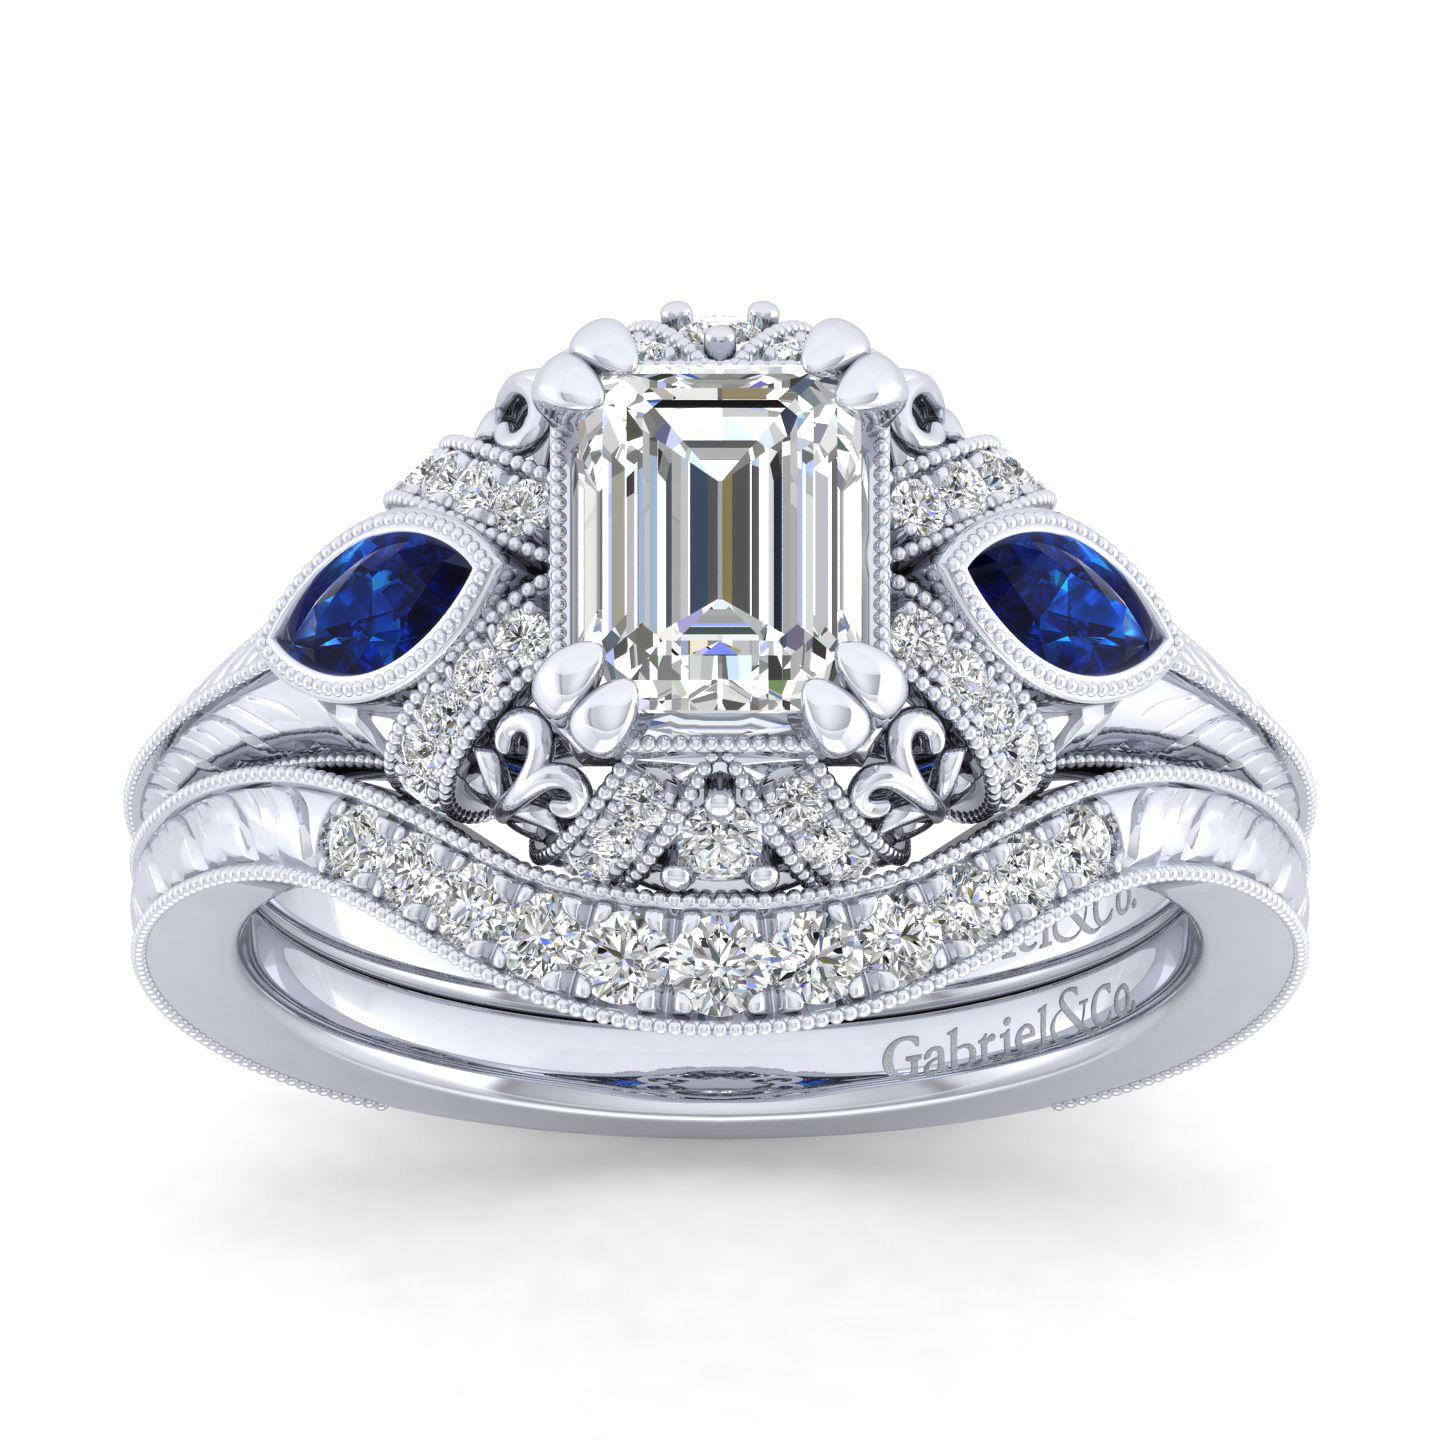 Vintage Inspired 14K White Gold Halo Emerald Cut Three Stone Sapphire and Diamond Engagement Ring